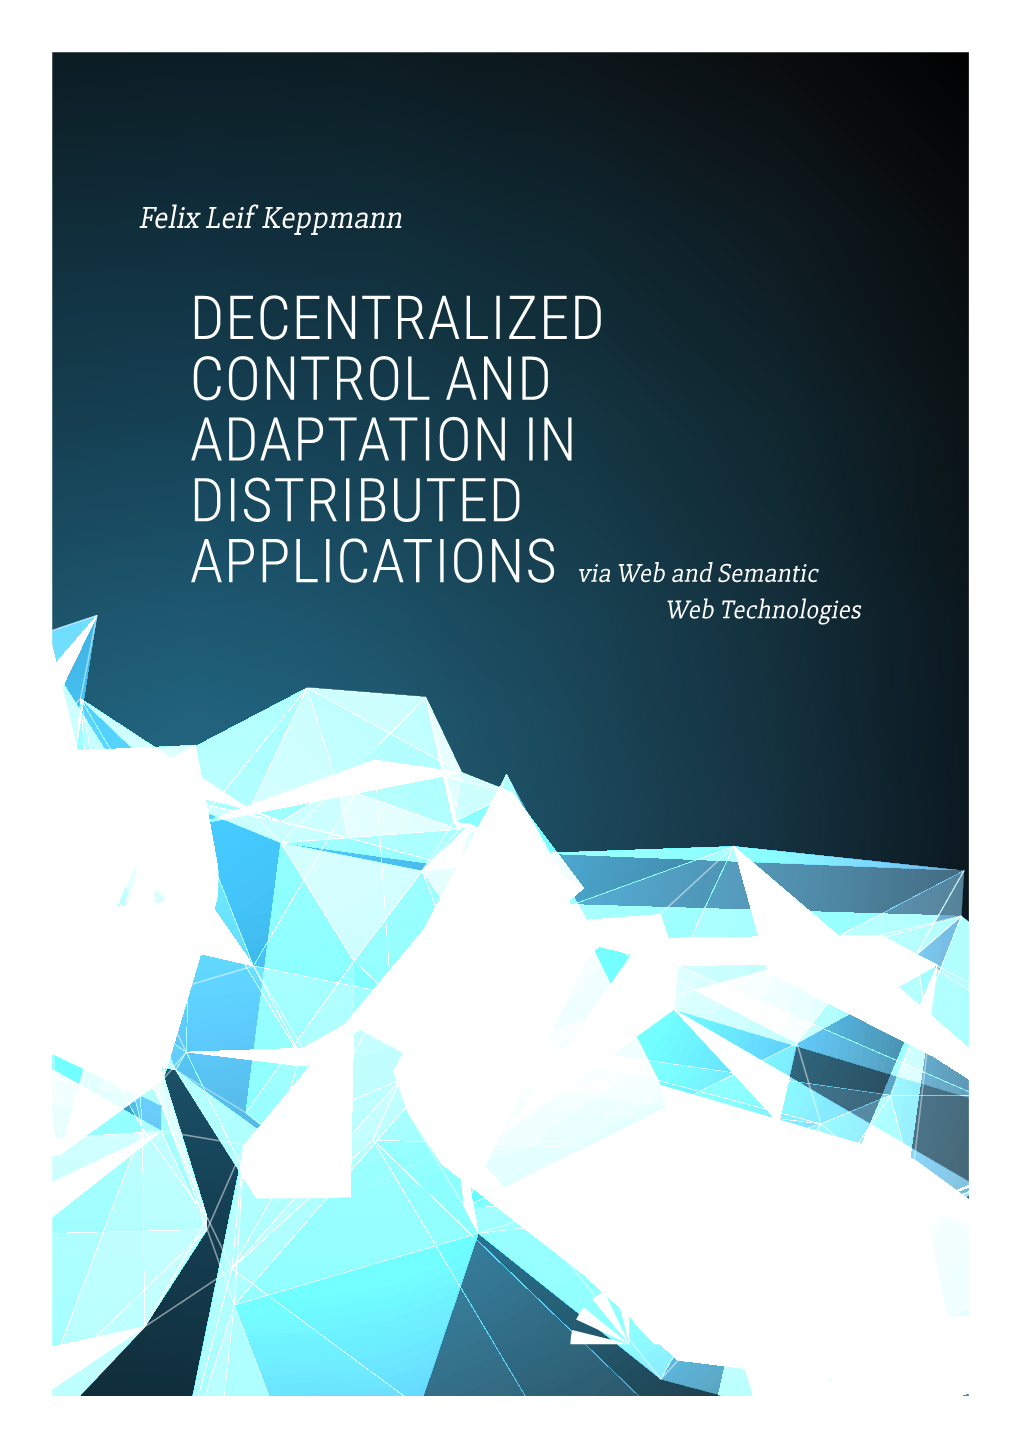 Decentralized Control and Adaptation in Distributed Applications Via Web and Semantic Web Technologies